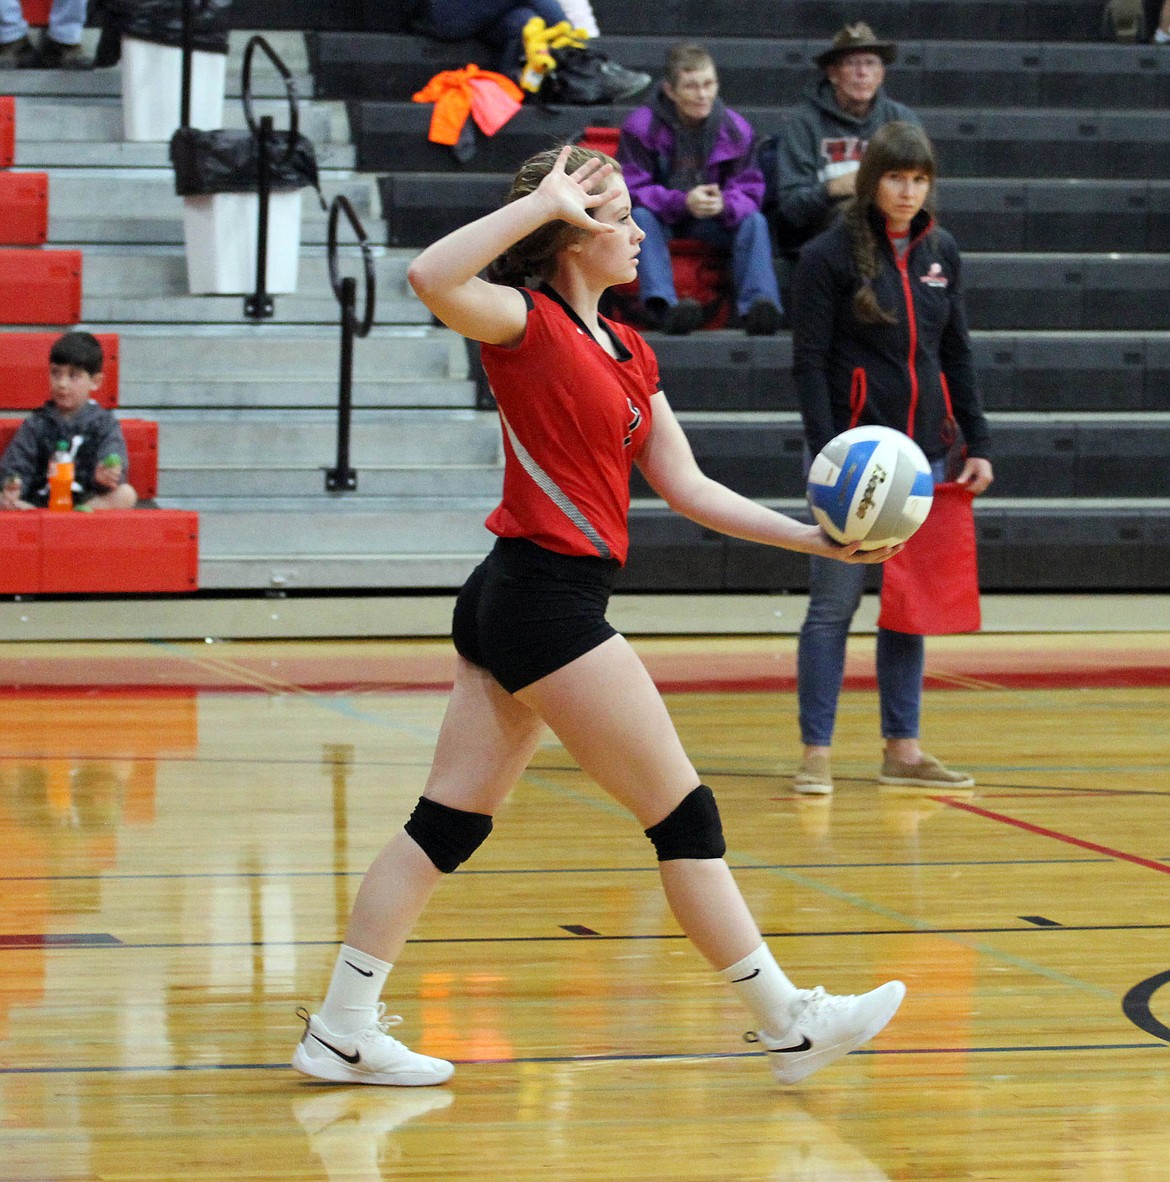 Photos by Josh McDonald
Wallace libero Kali Davis prepares to serve the ball during Wallace&#146;s recent match with Kootenai. 
Hayley Oertli sets the ball up for one of her hitters during the second set of the Miners&#146; North Star League win over Kootenai.